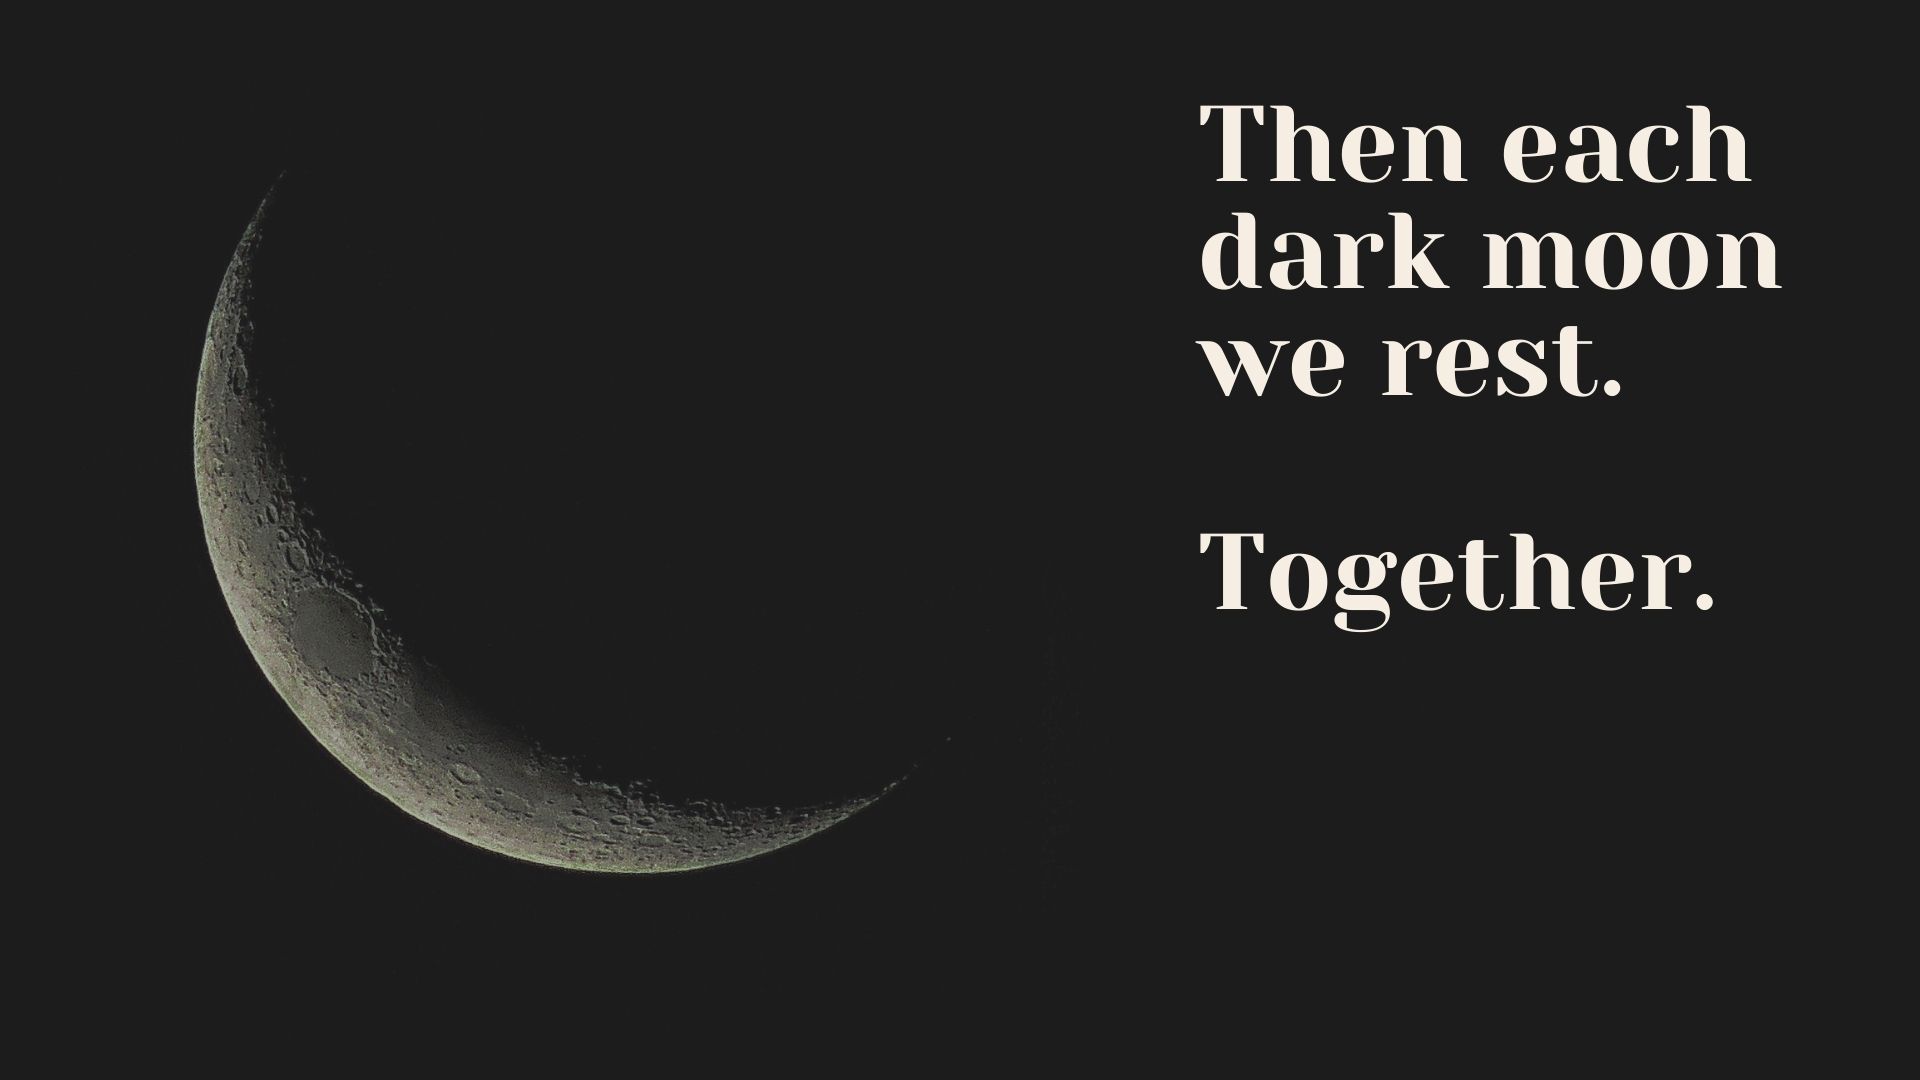 crescent moon with text "then each dark moon we rest. Together."